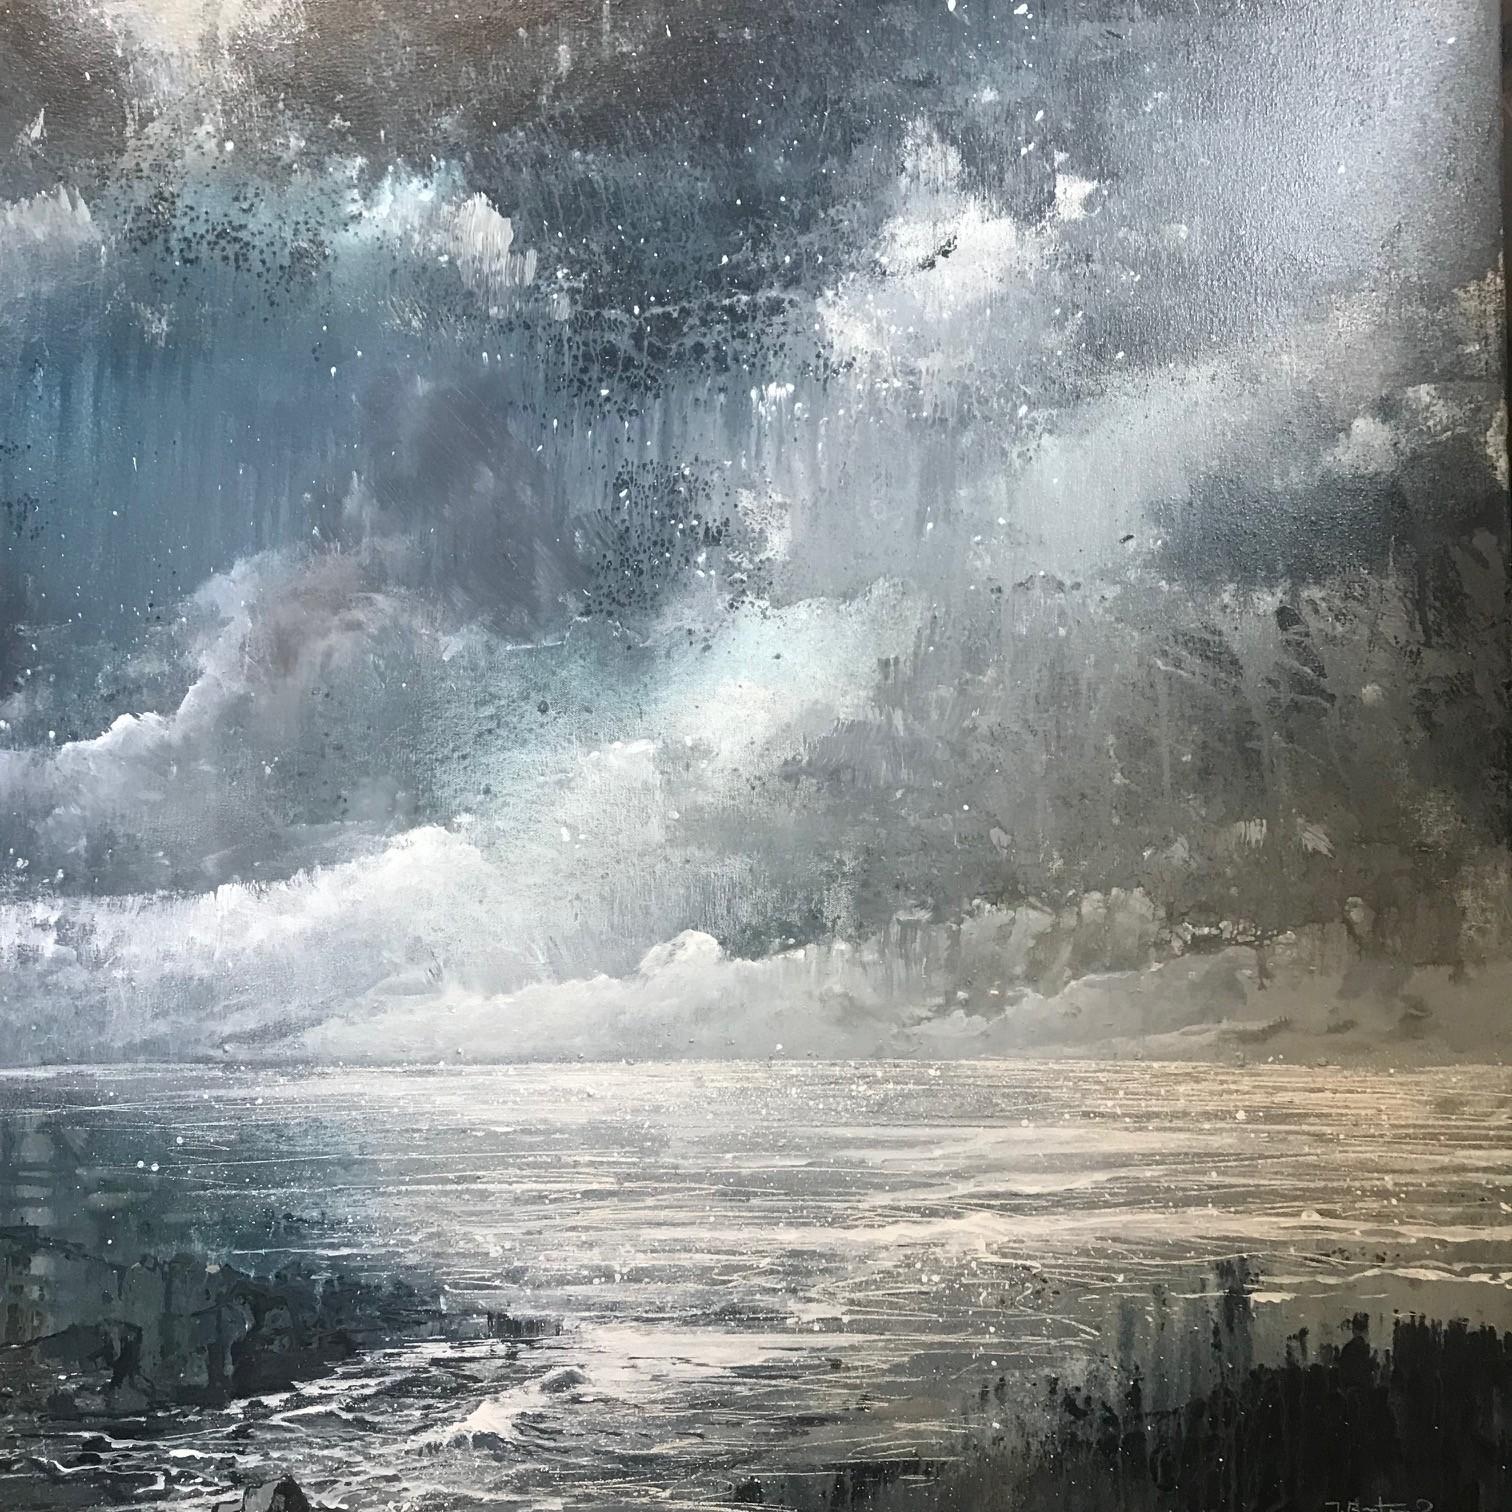 Darkness at the Coast, Original painting, Contemporary Seascape, Mixed media oil